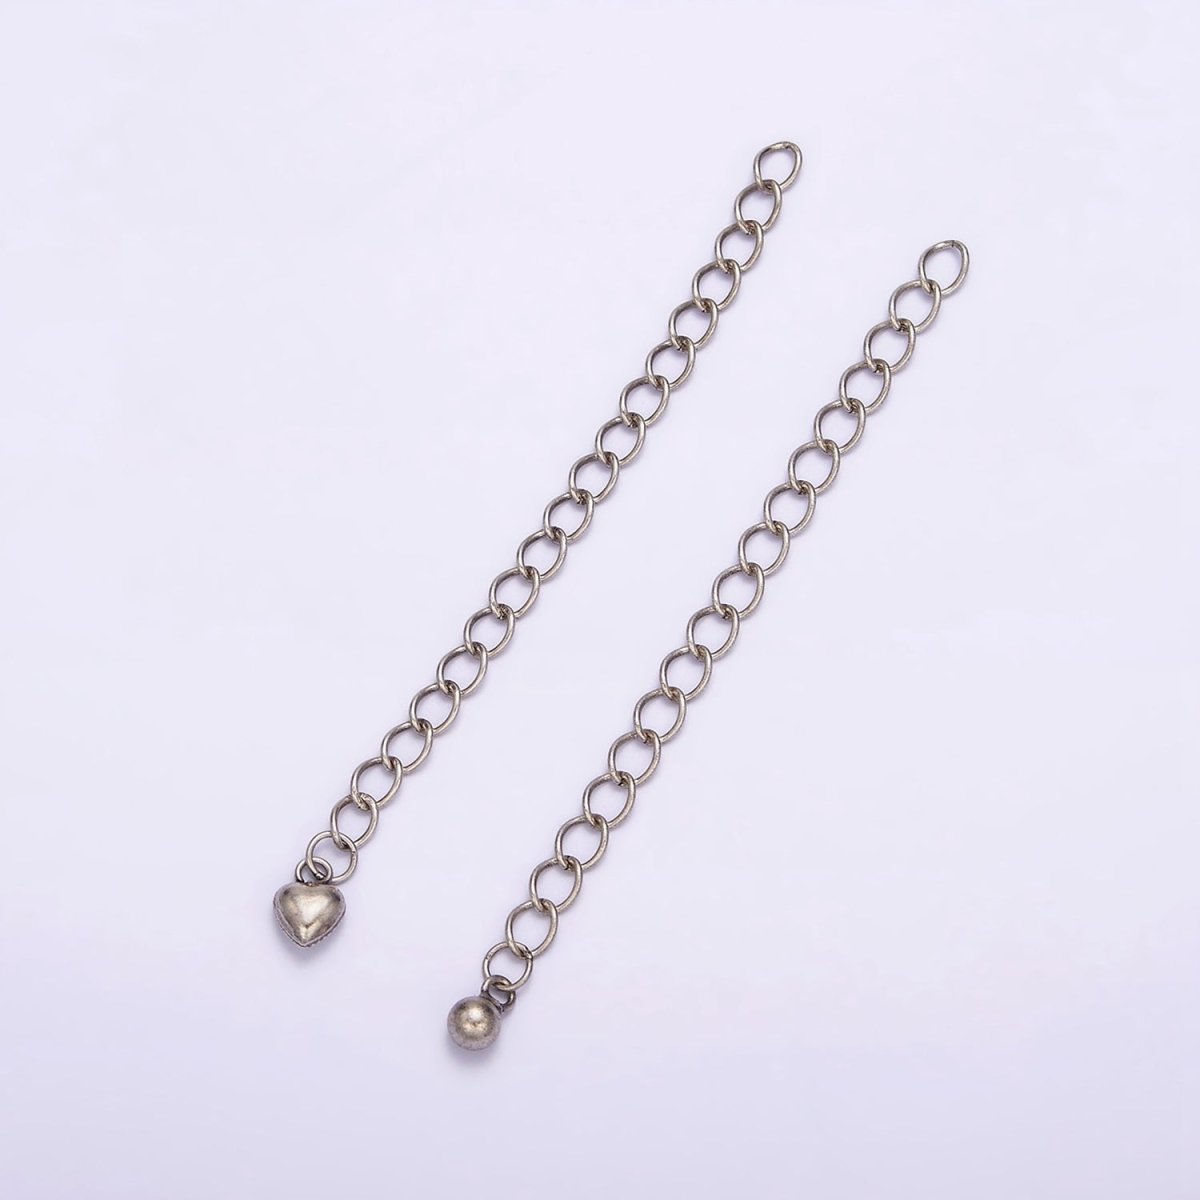 1x Sterling Silver Chain Extender 925 Sterling Silver Supply | Oxidized Silver Antique Looking Chain SL-303 SL-340 - DLUXCA